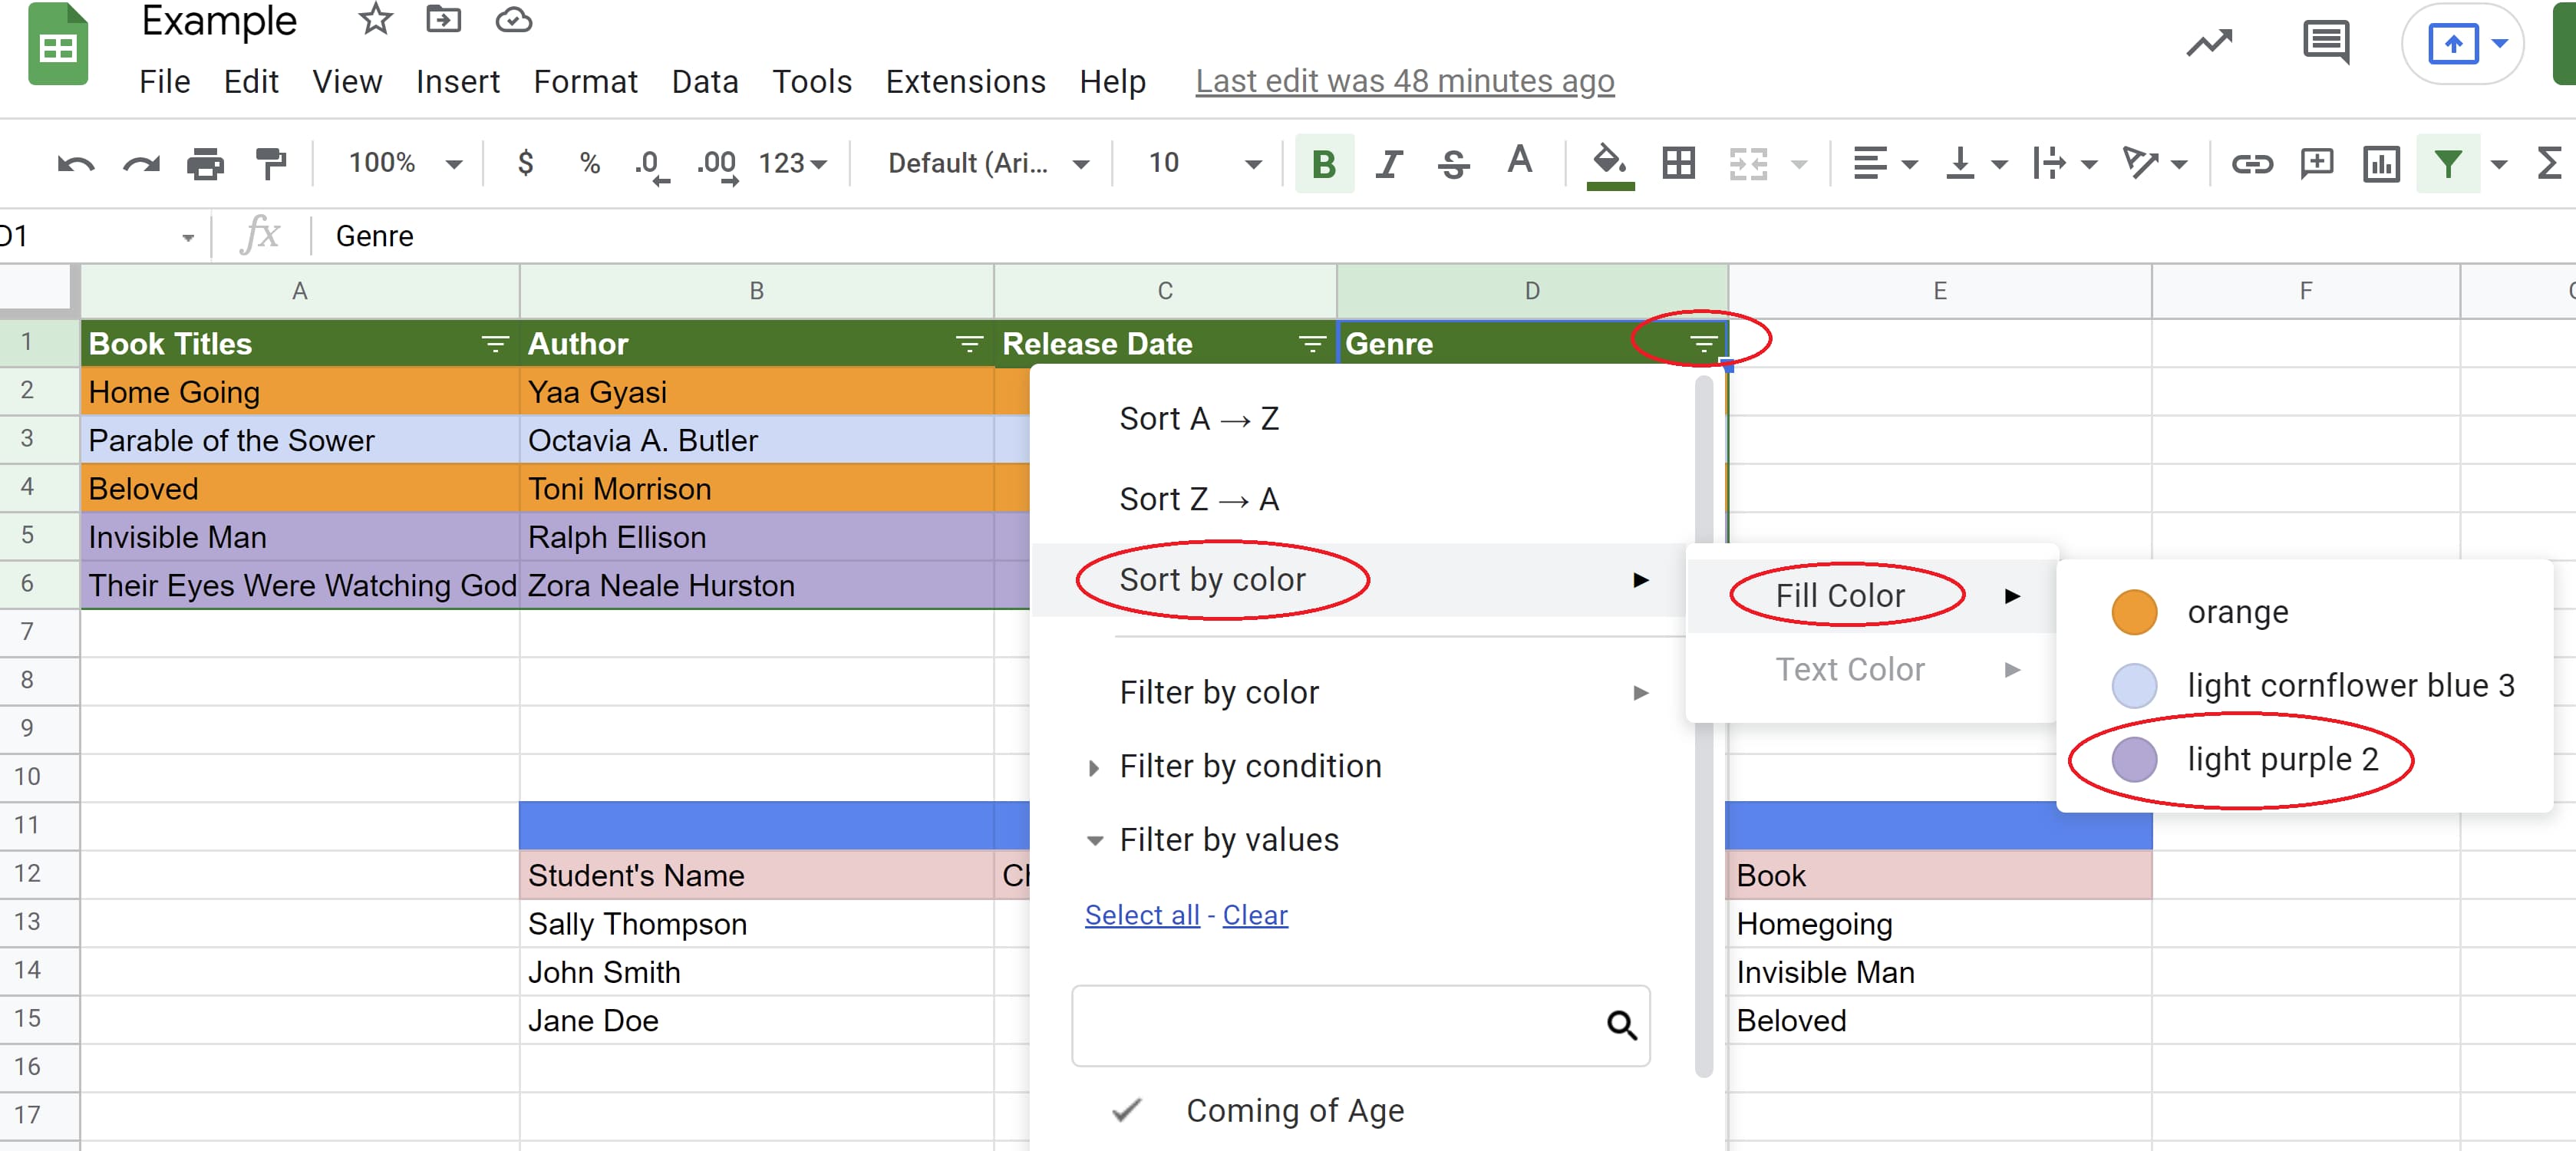 GS%20E%2022.jpg?width=3357&name=GS%20E%2022 - How to Sort in Google Sheets